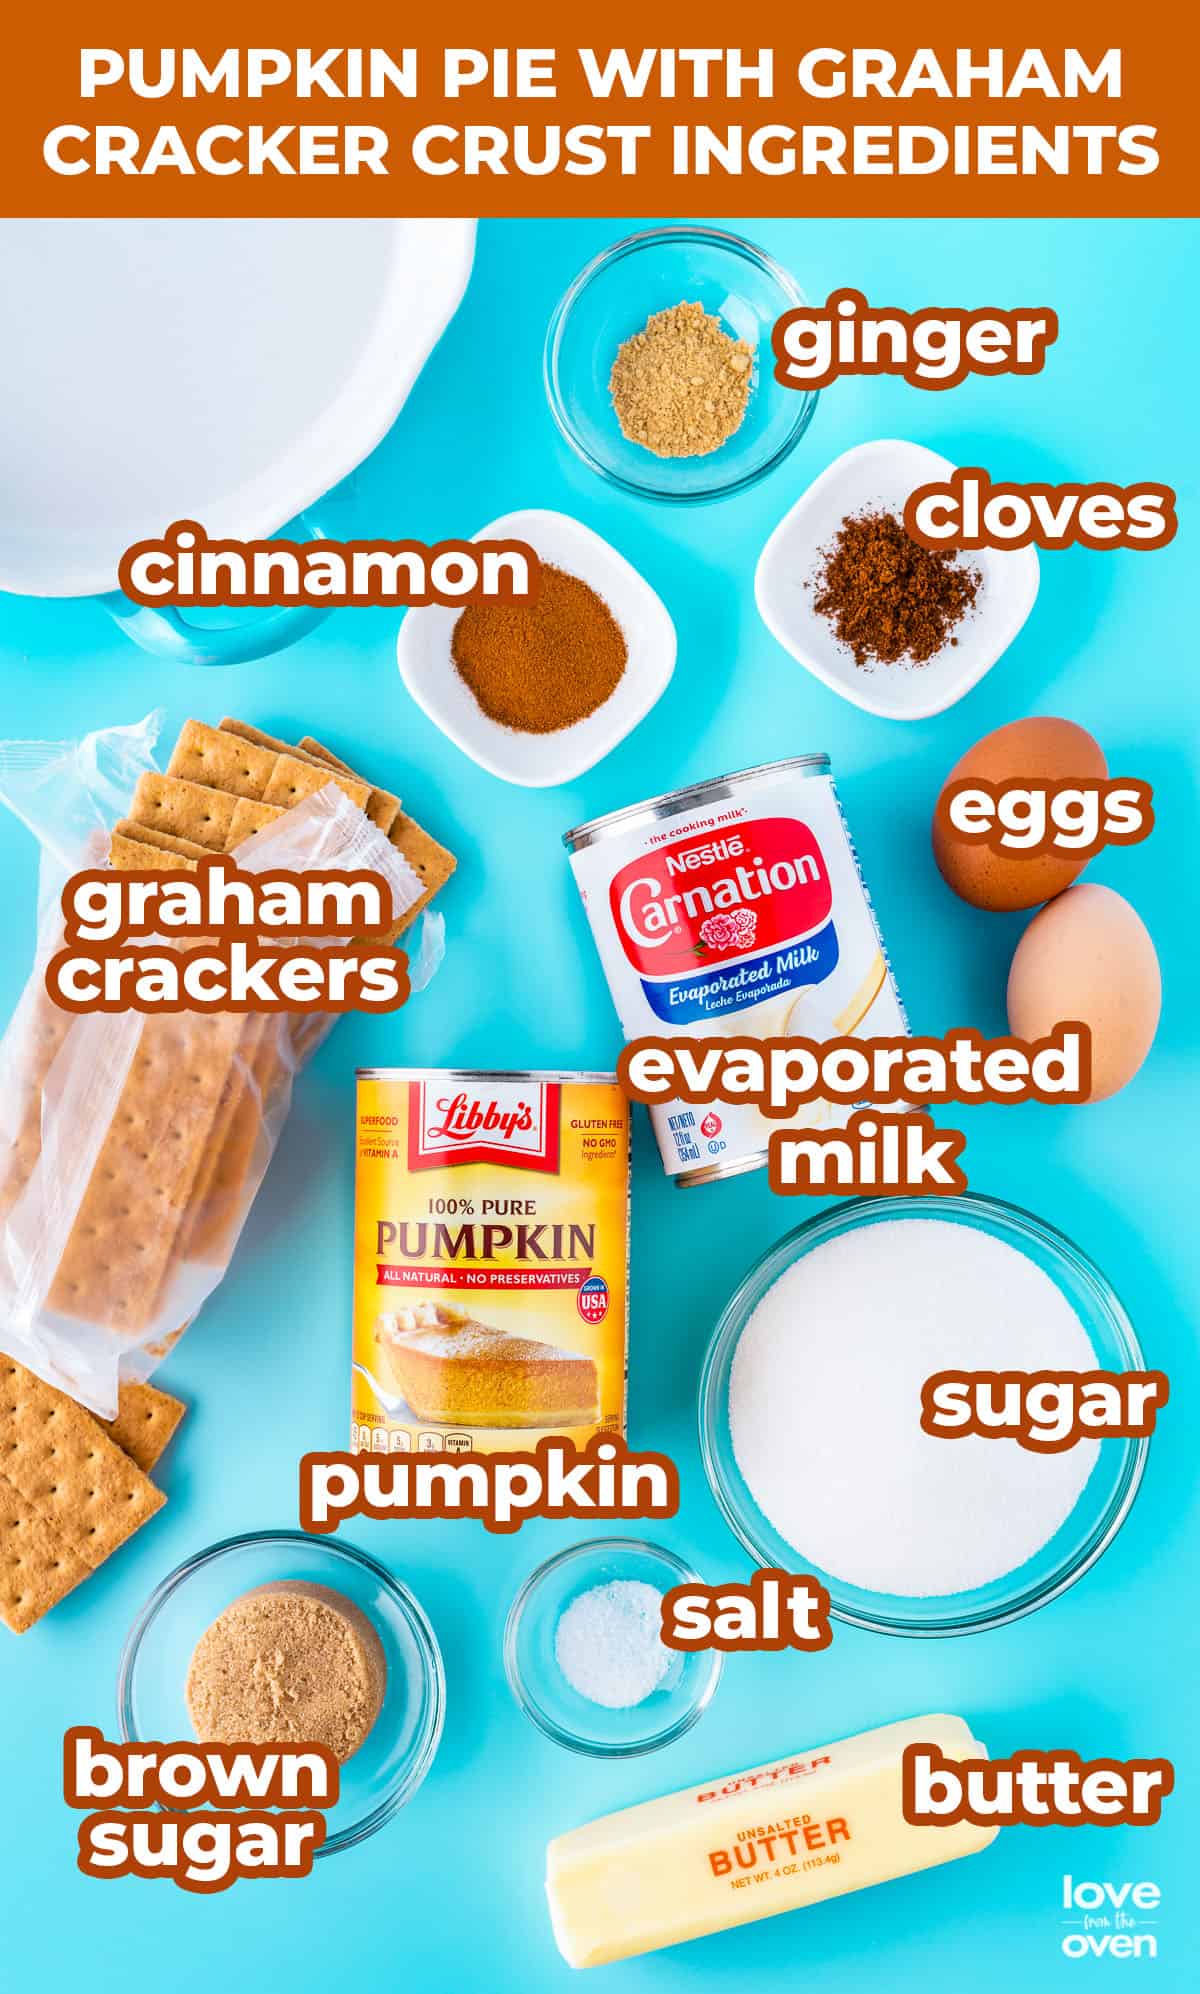 The ingredients to make a pumpkin pie with a graham cracker crust.